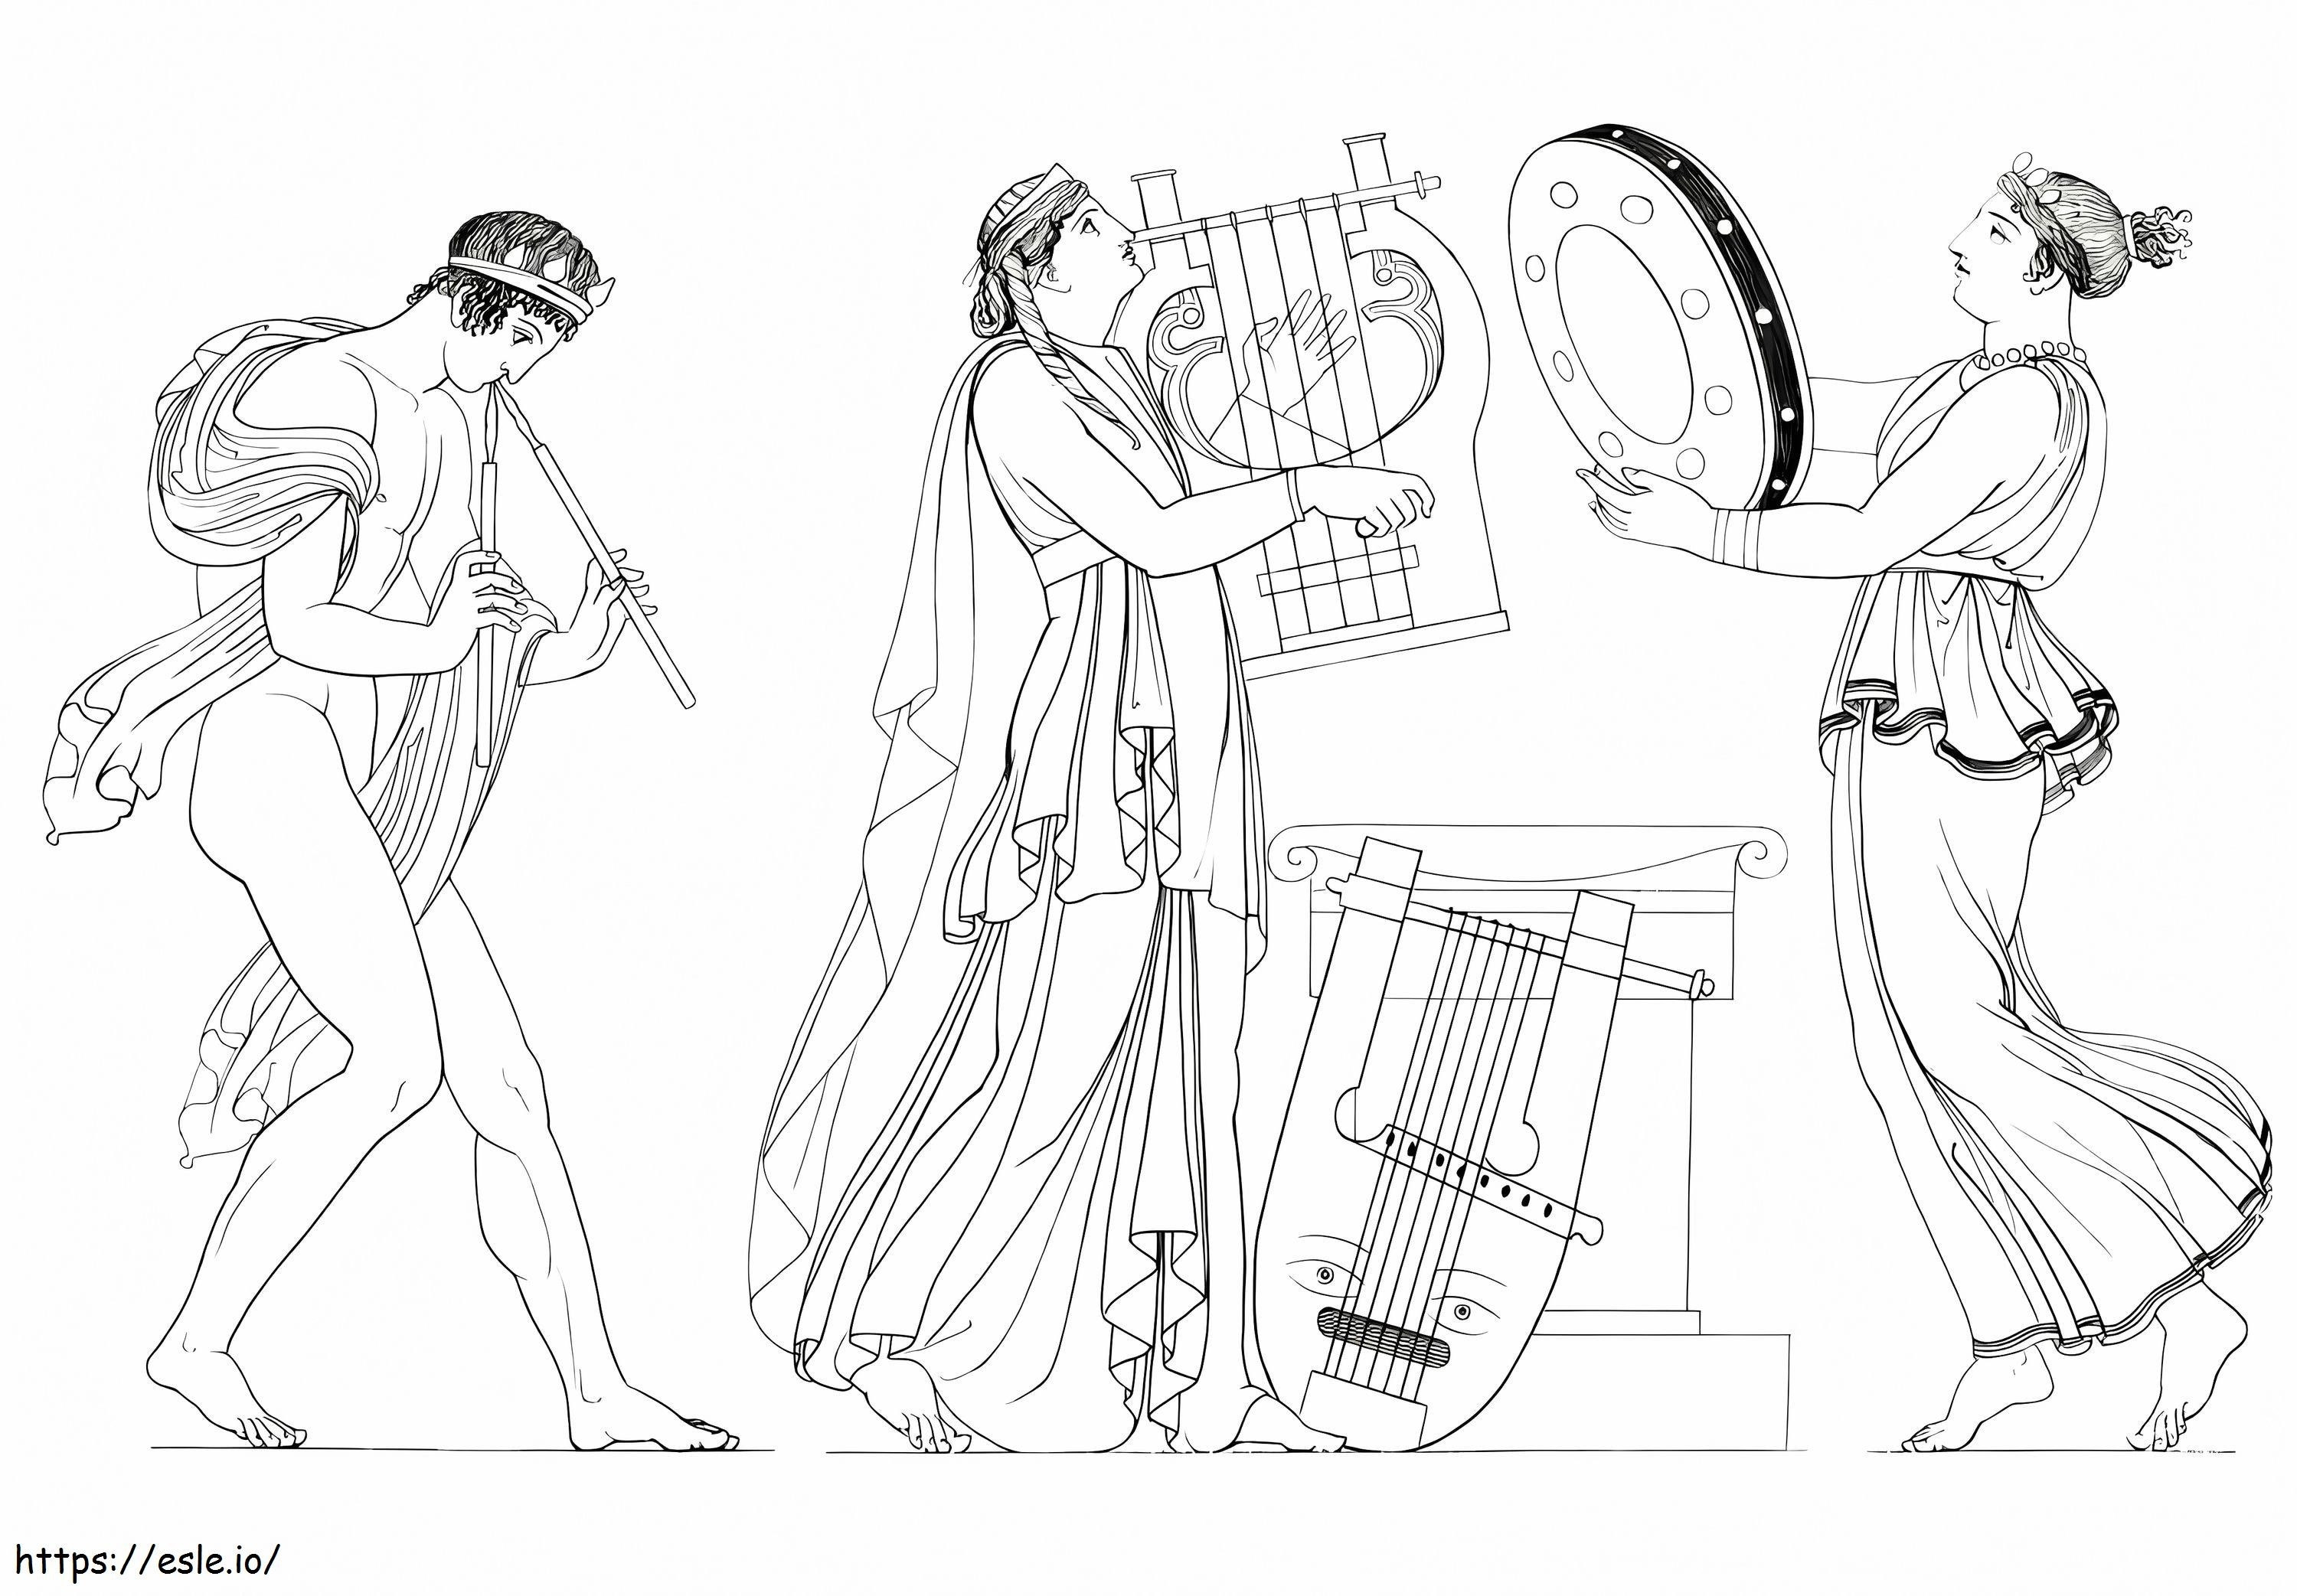 Grecian Musical Performers coloring page